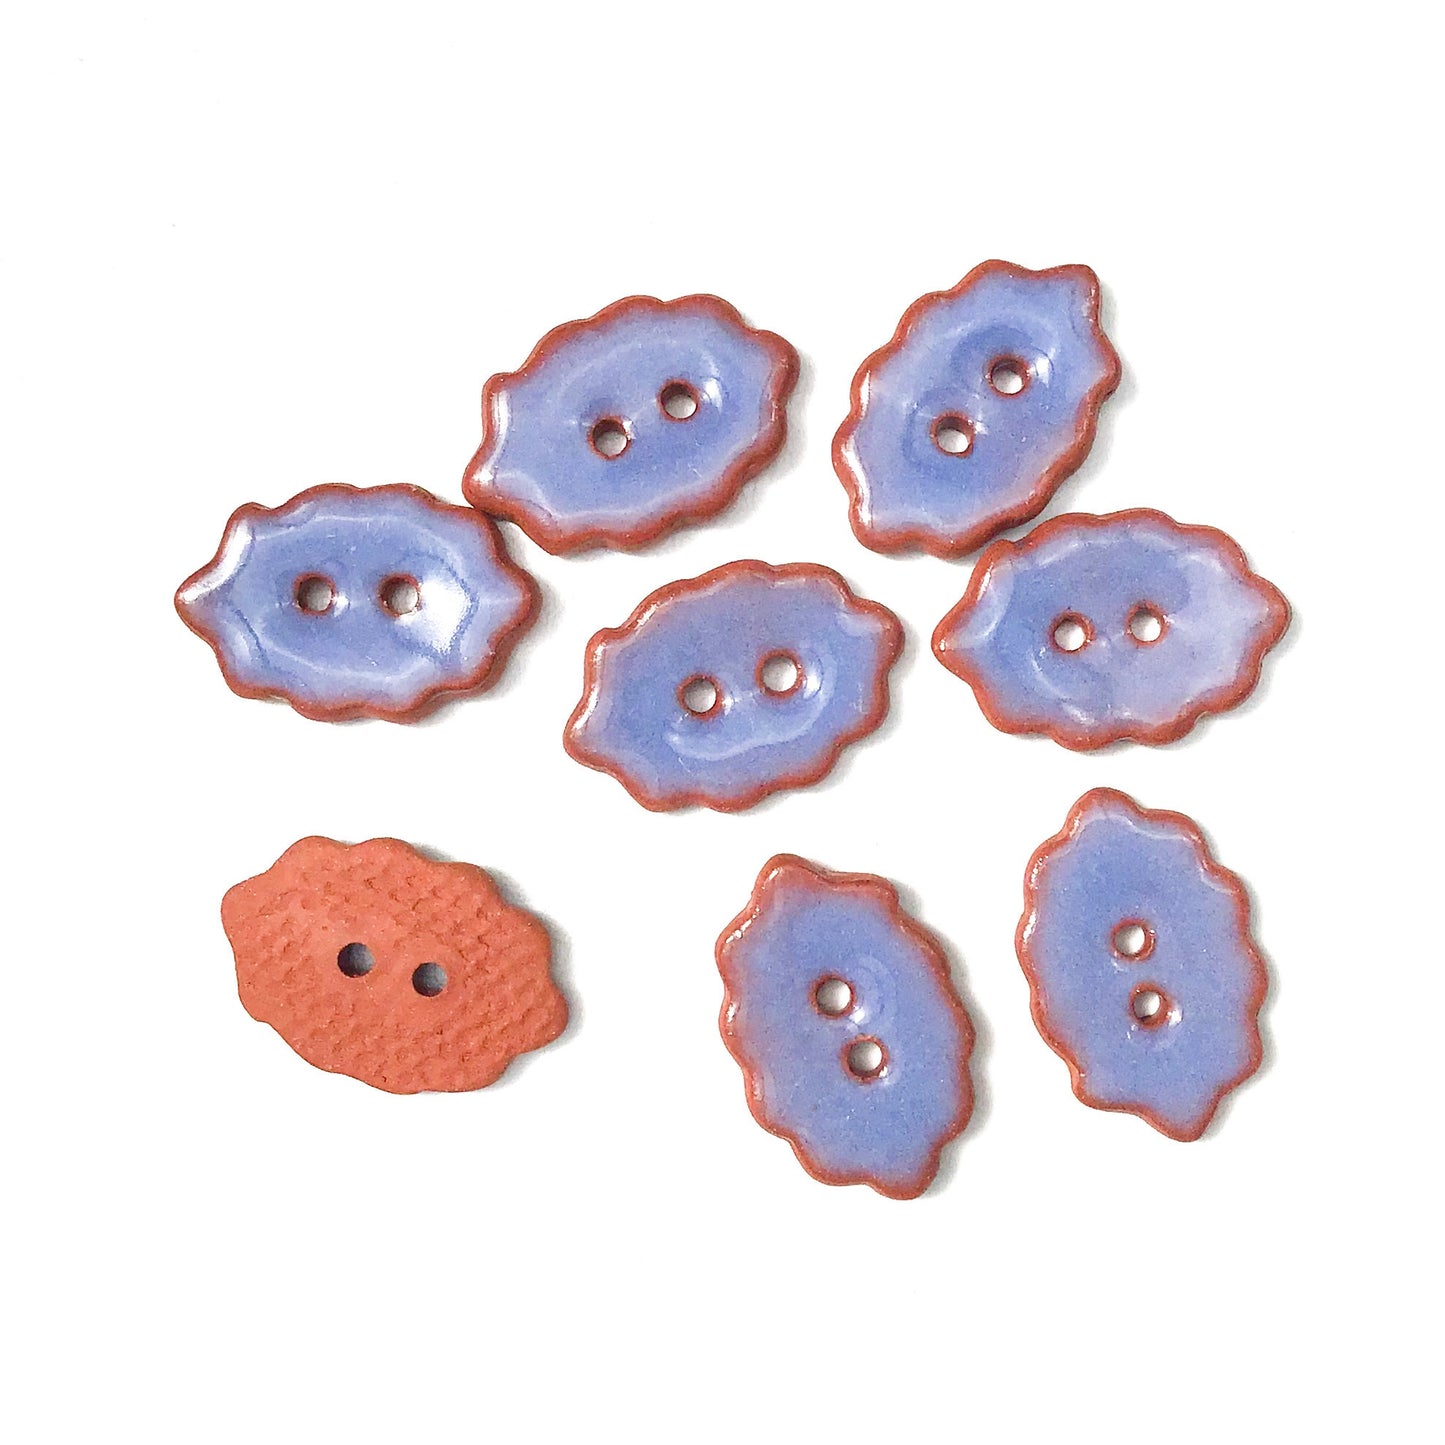 Scalloped Purple Ceramic Buttons - Small Purple Ceramic Buttons - 7/16" x 3/4" - 8 Pack (ws-289)